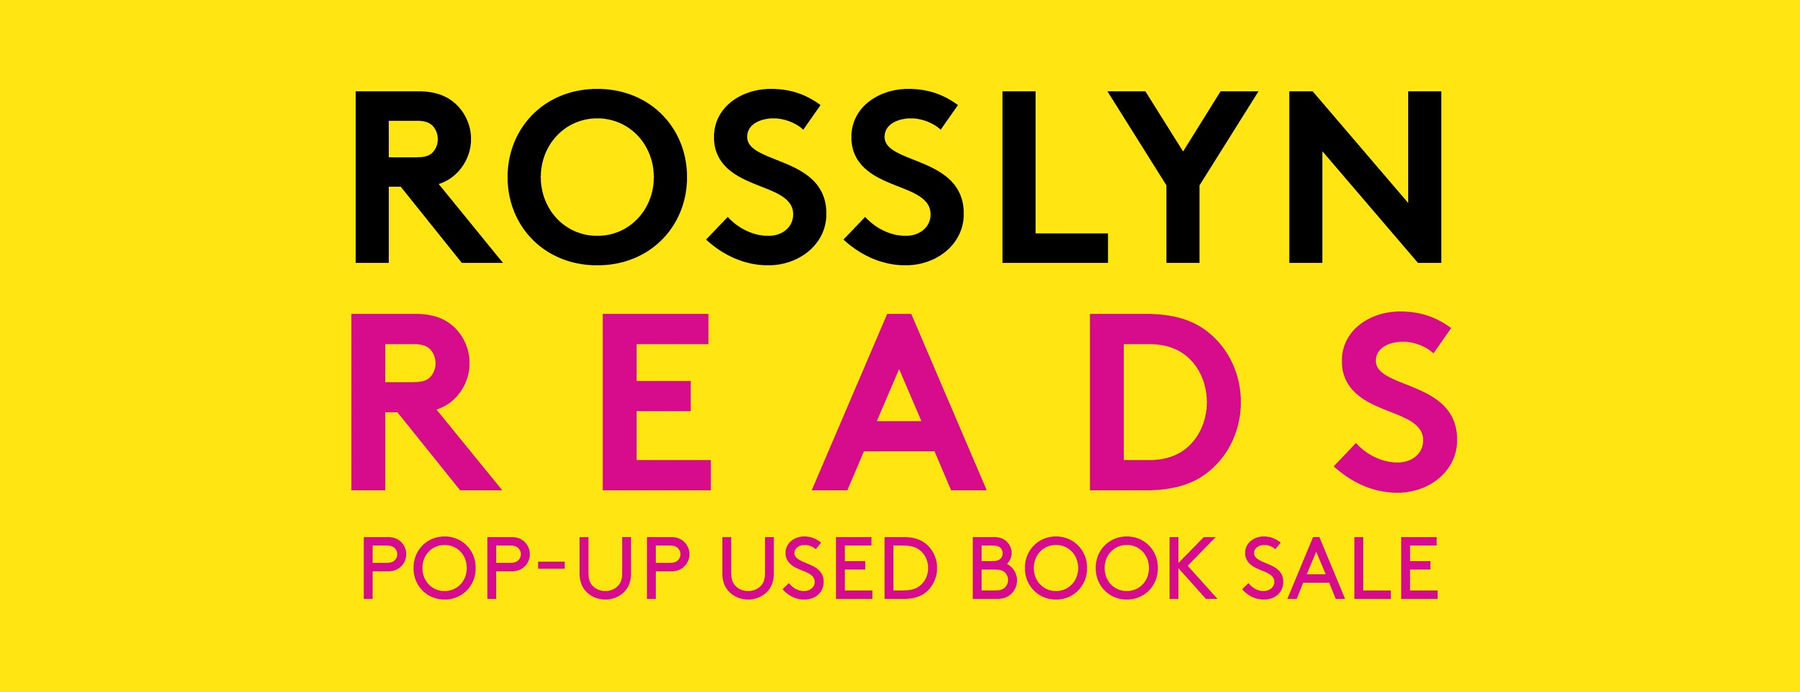 Rosslyn Reads Pop-Up Used Book Sale